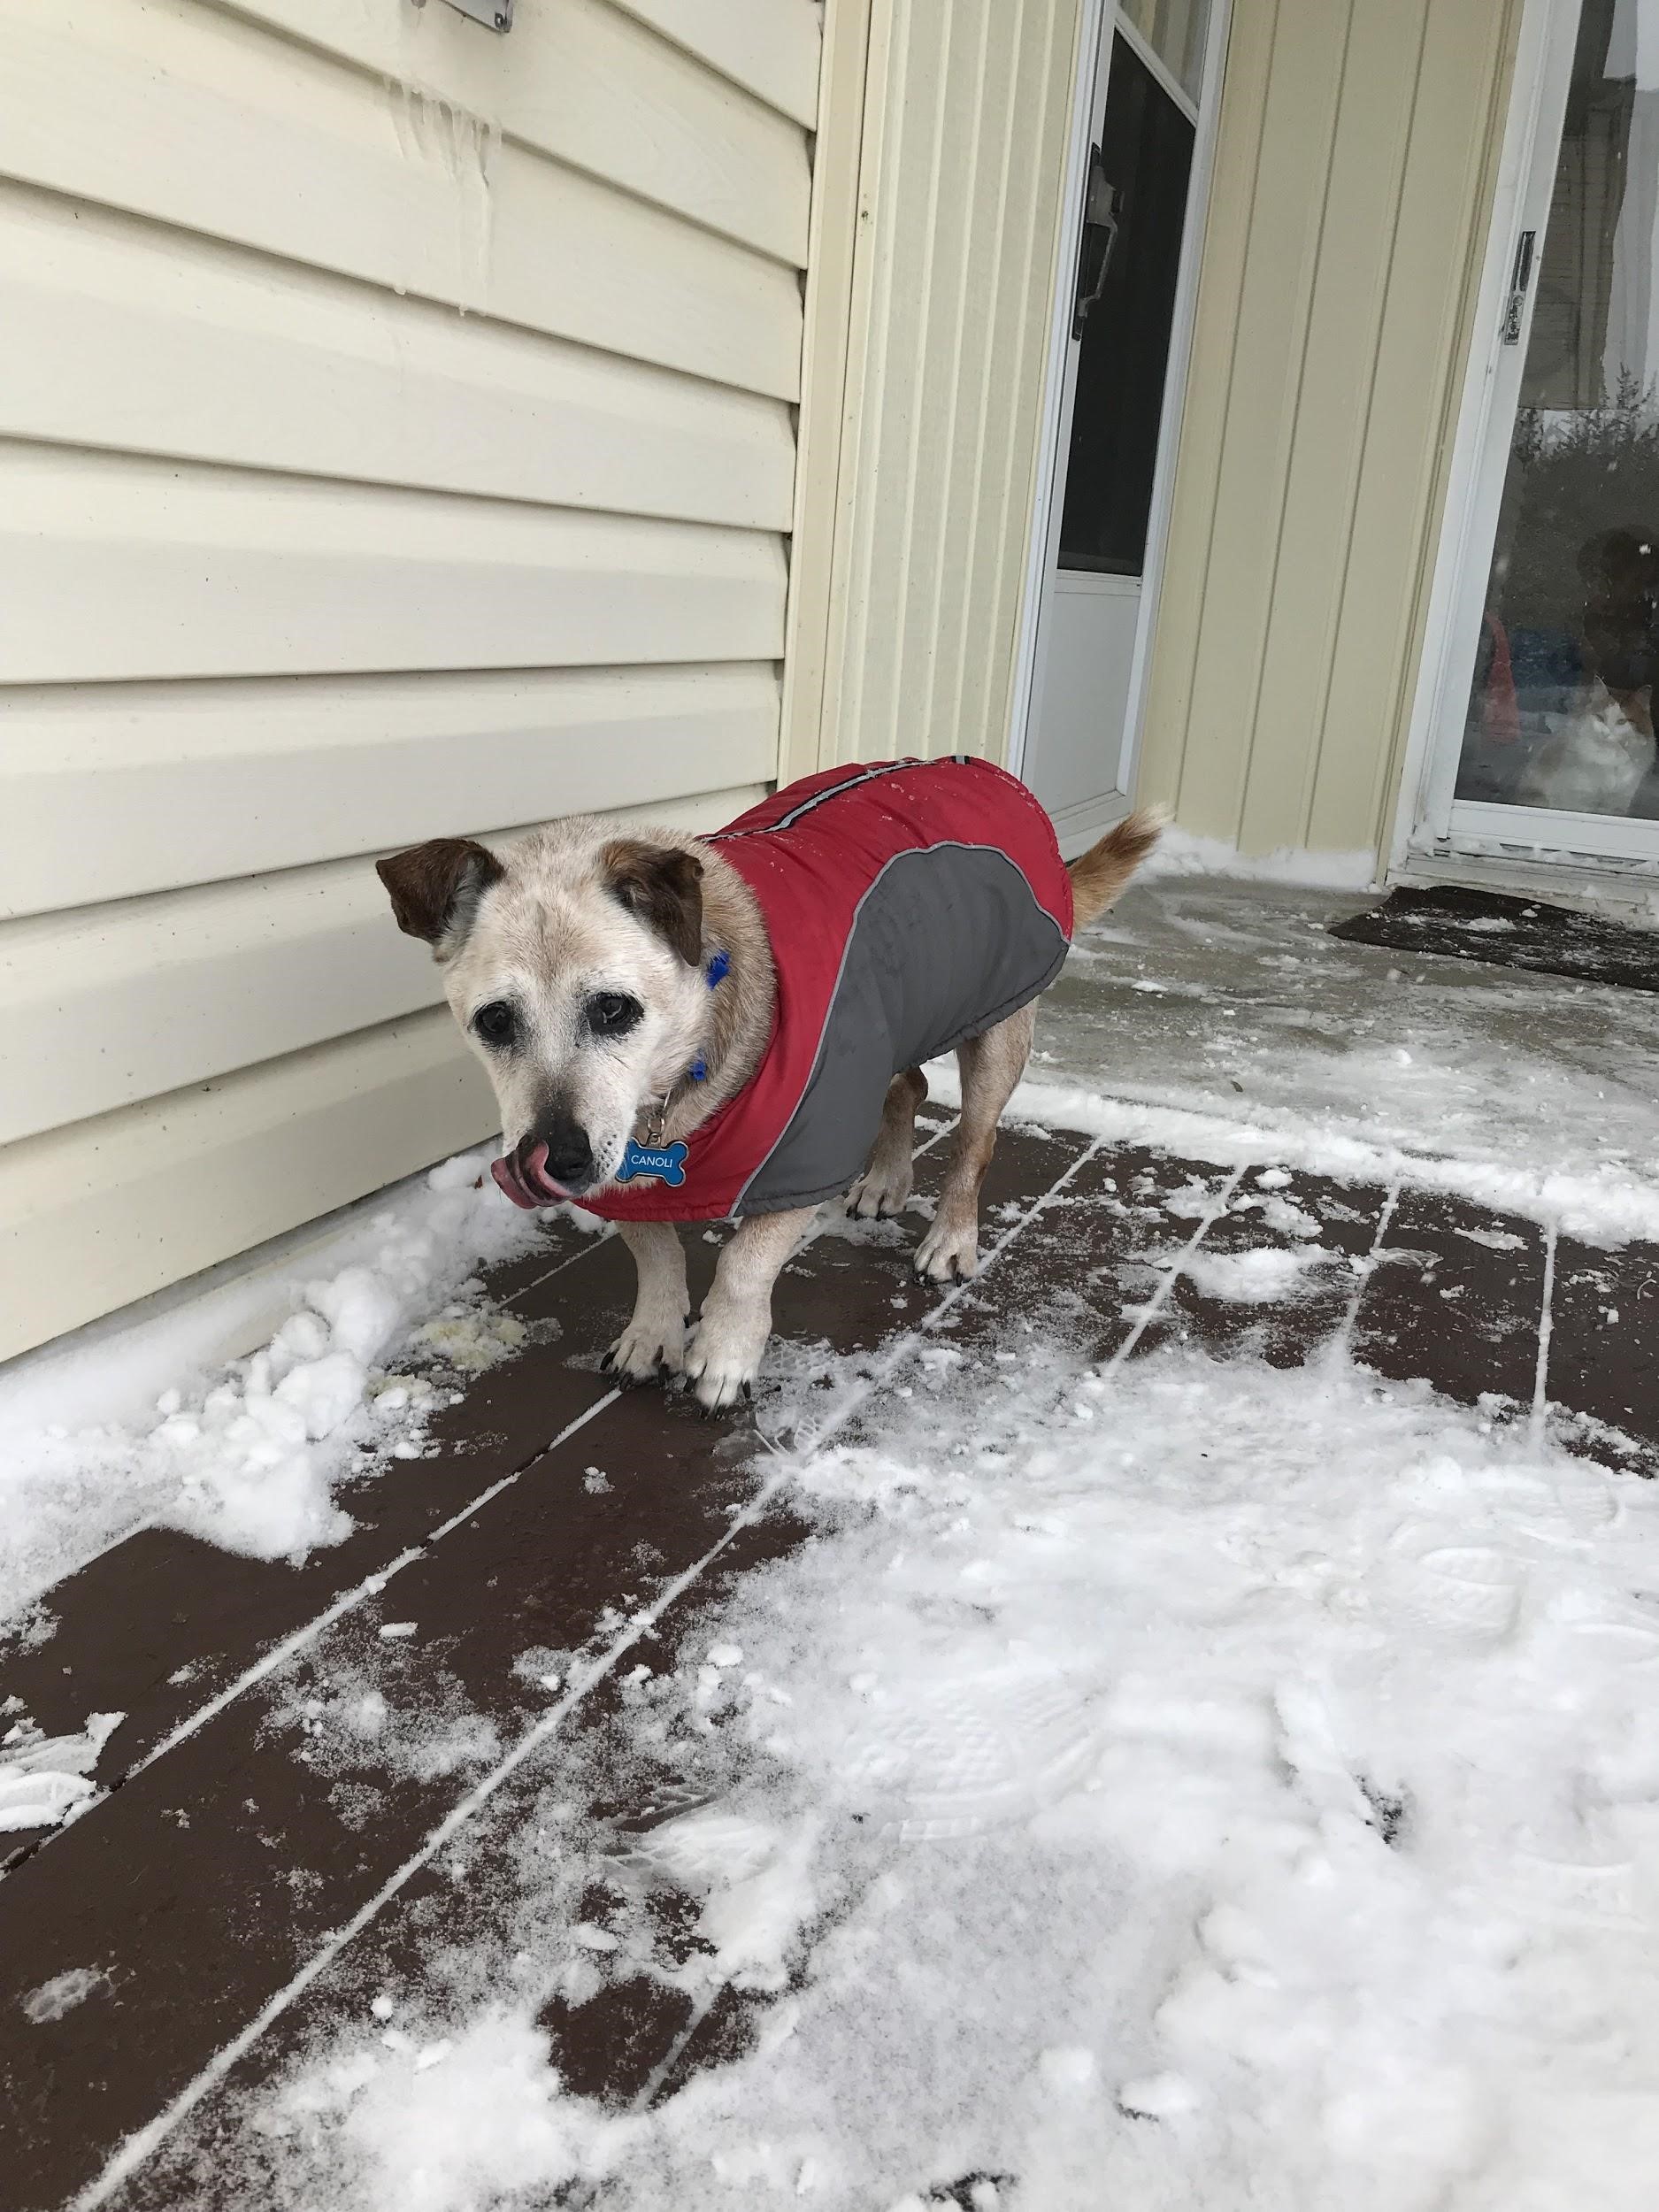 A dog wearing a jacket and standing on snowy ground